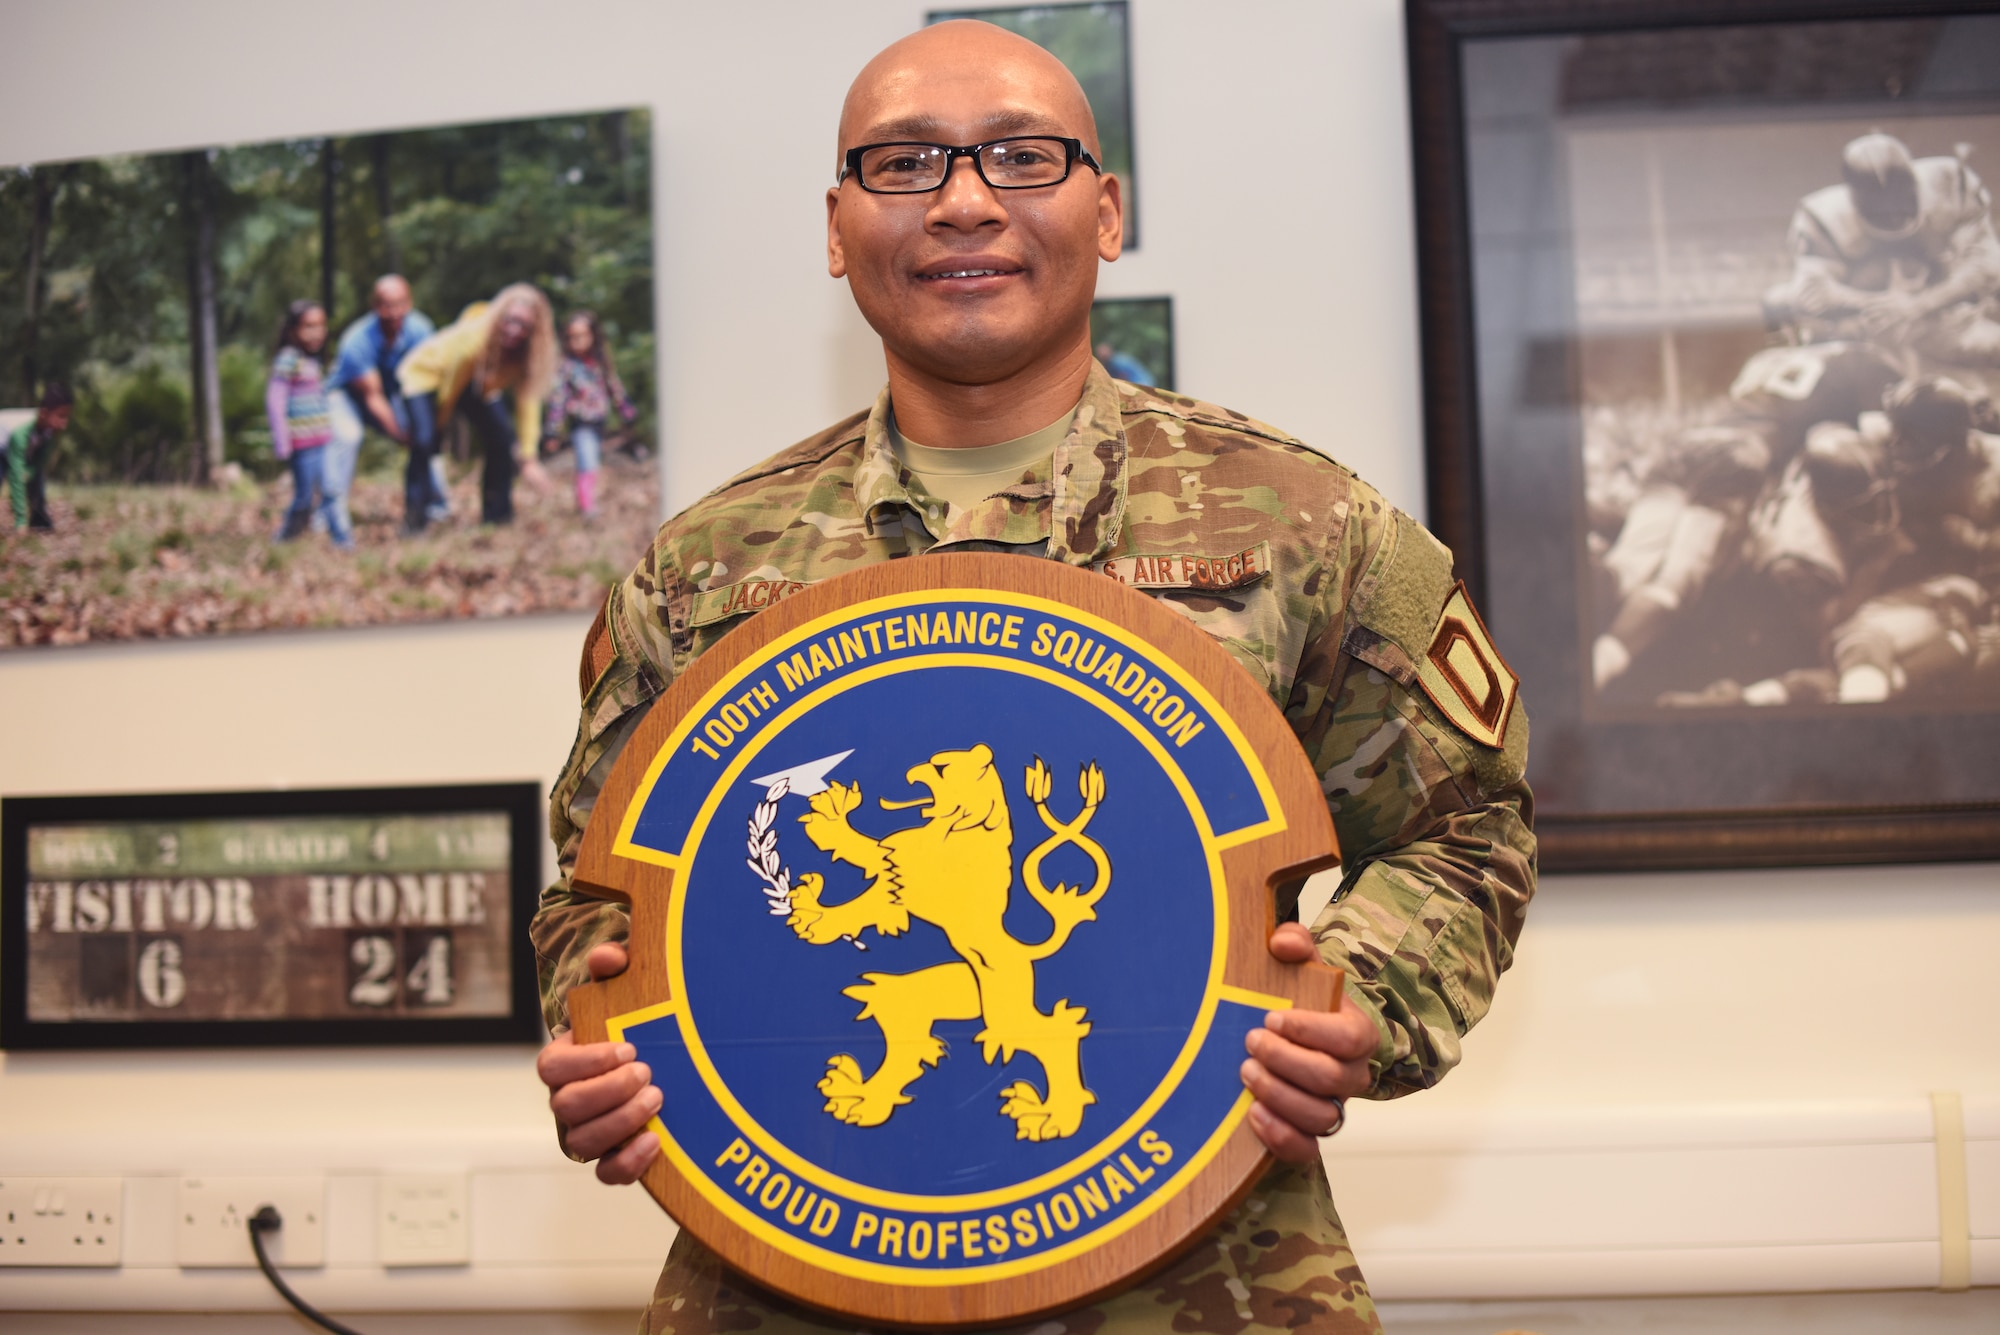 U.S. Air Force Senior Master Sgt. Michael Jackson, 100th Maintenance Squadron first sergeant, poses for a photo at RAF Mildenhall, England, March 6, 2019. Jackson, who was born in Pohang City, South Korea, has been a first sergeant at Laughlin Air Force Base, Texas and RAF Mildenhall, England. (U.S. Air Force photo by Airman 1st Class Brandon Esau)